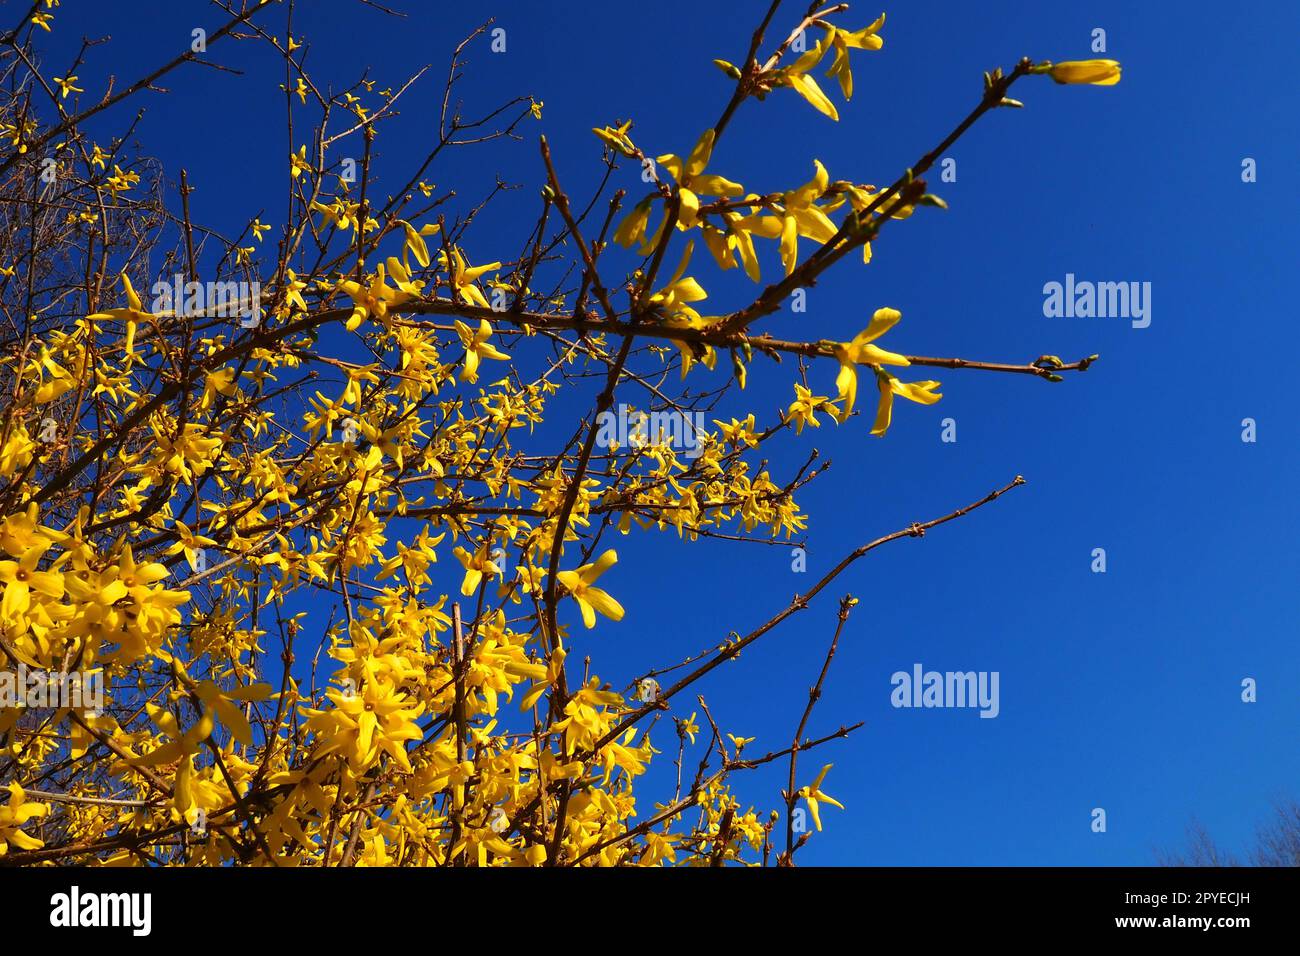 Forsythia is a genus of shrubs and small trees of the Olive family. Numerous yellow flowers on branches and shoots against a blue sky. Lamiaceae Olive family Genus Forsythia Stock Photo